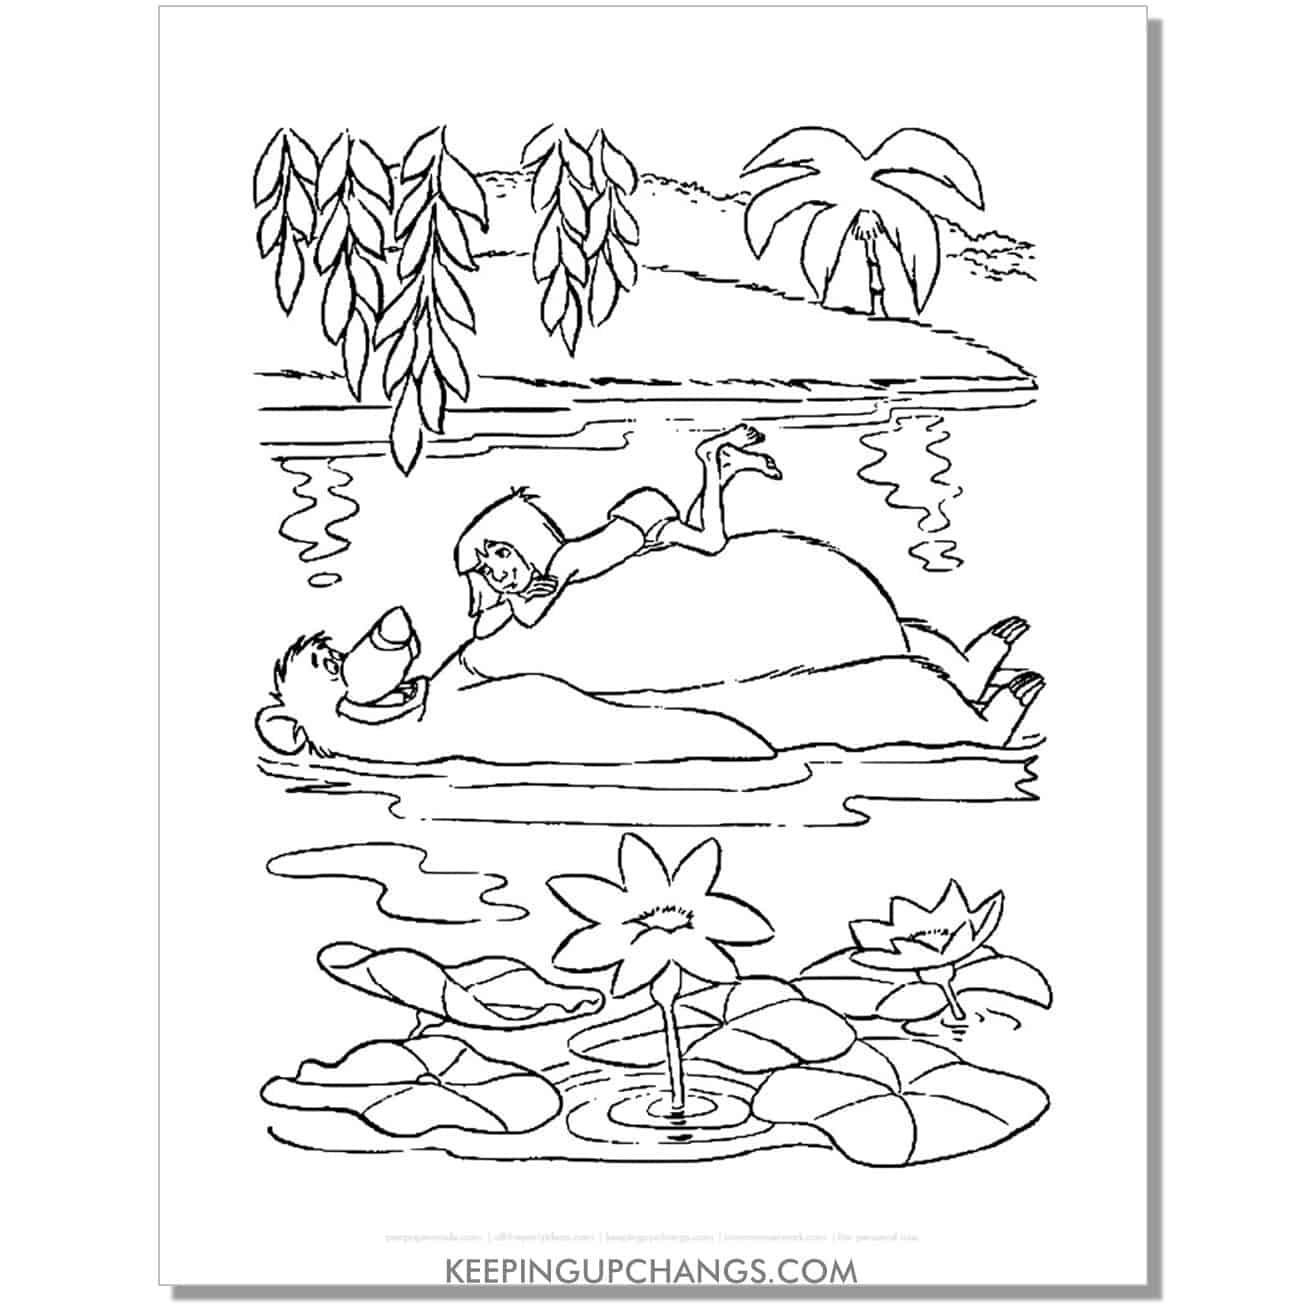 mowgli laying on baloo's stomach as floating in river jungle book coloring page, sheet.